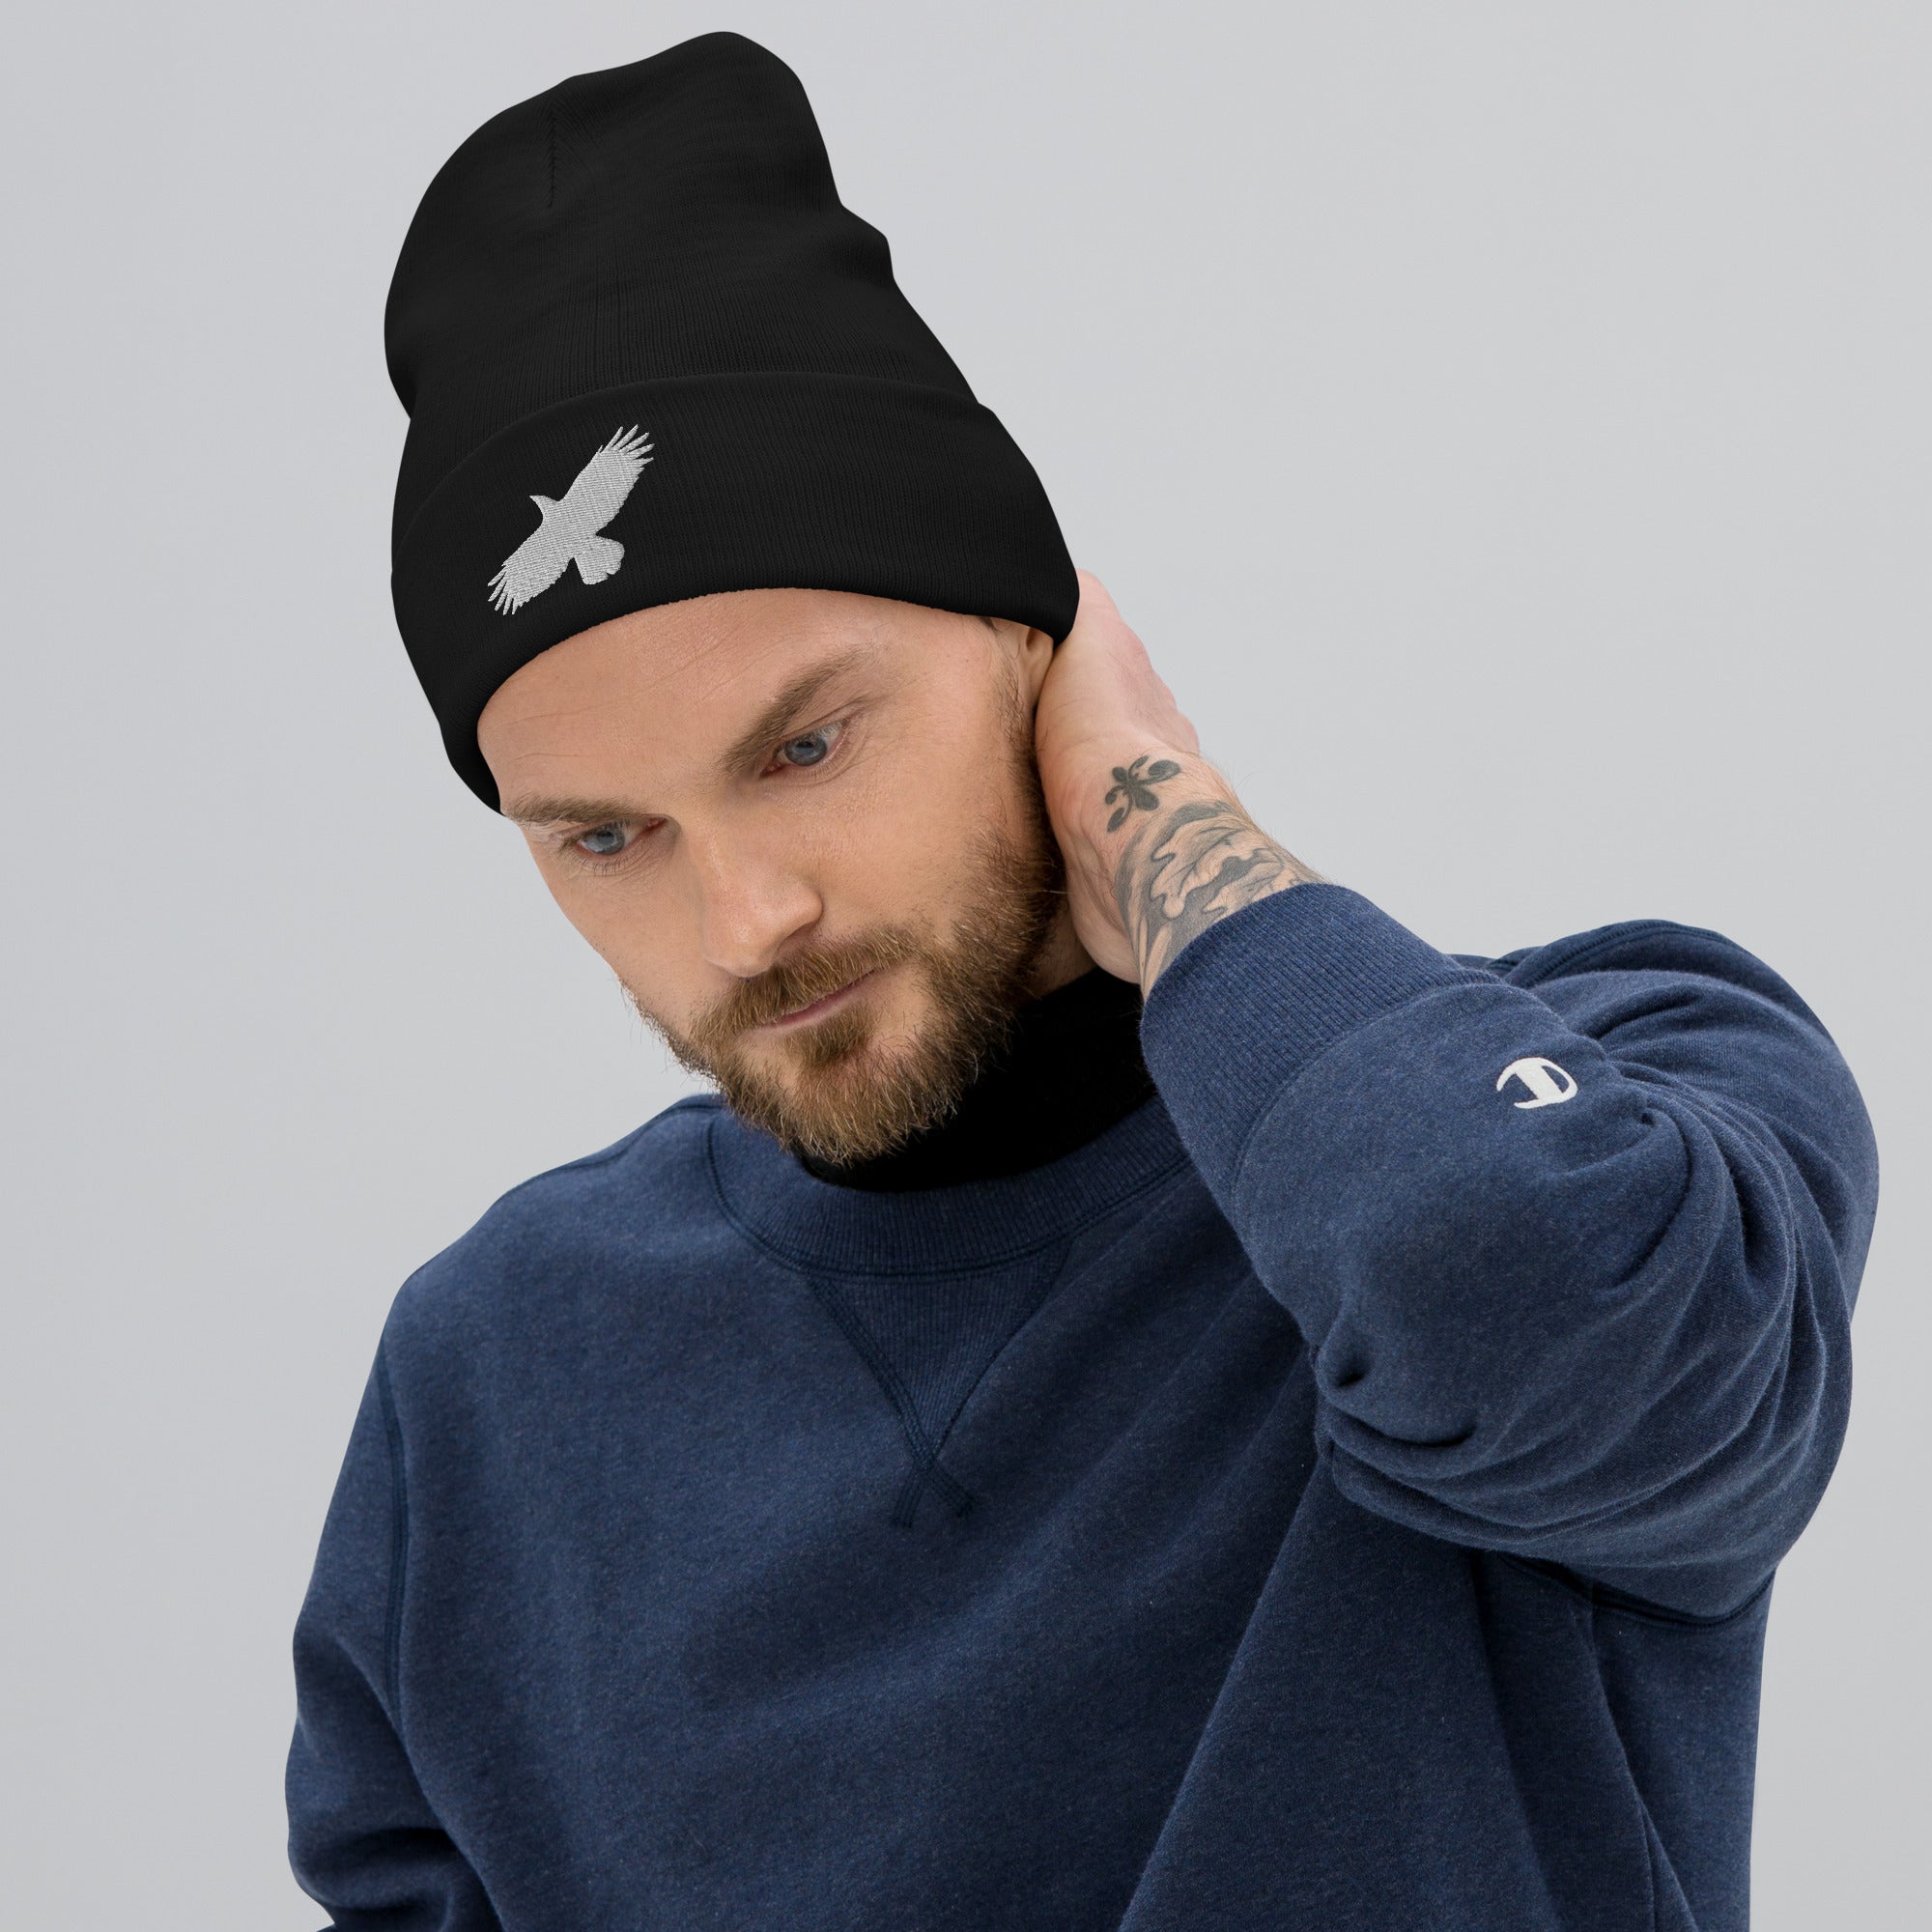 Flying Raven Black Bird Embroidered Cuff Beanie - Edge of Life Designs